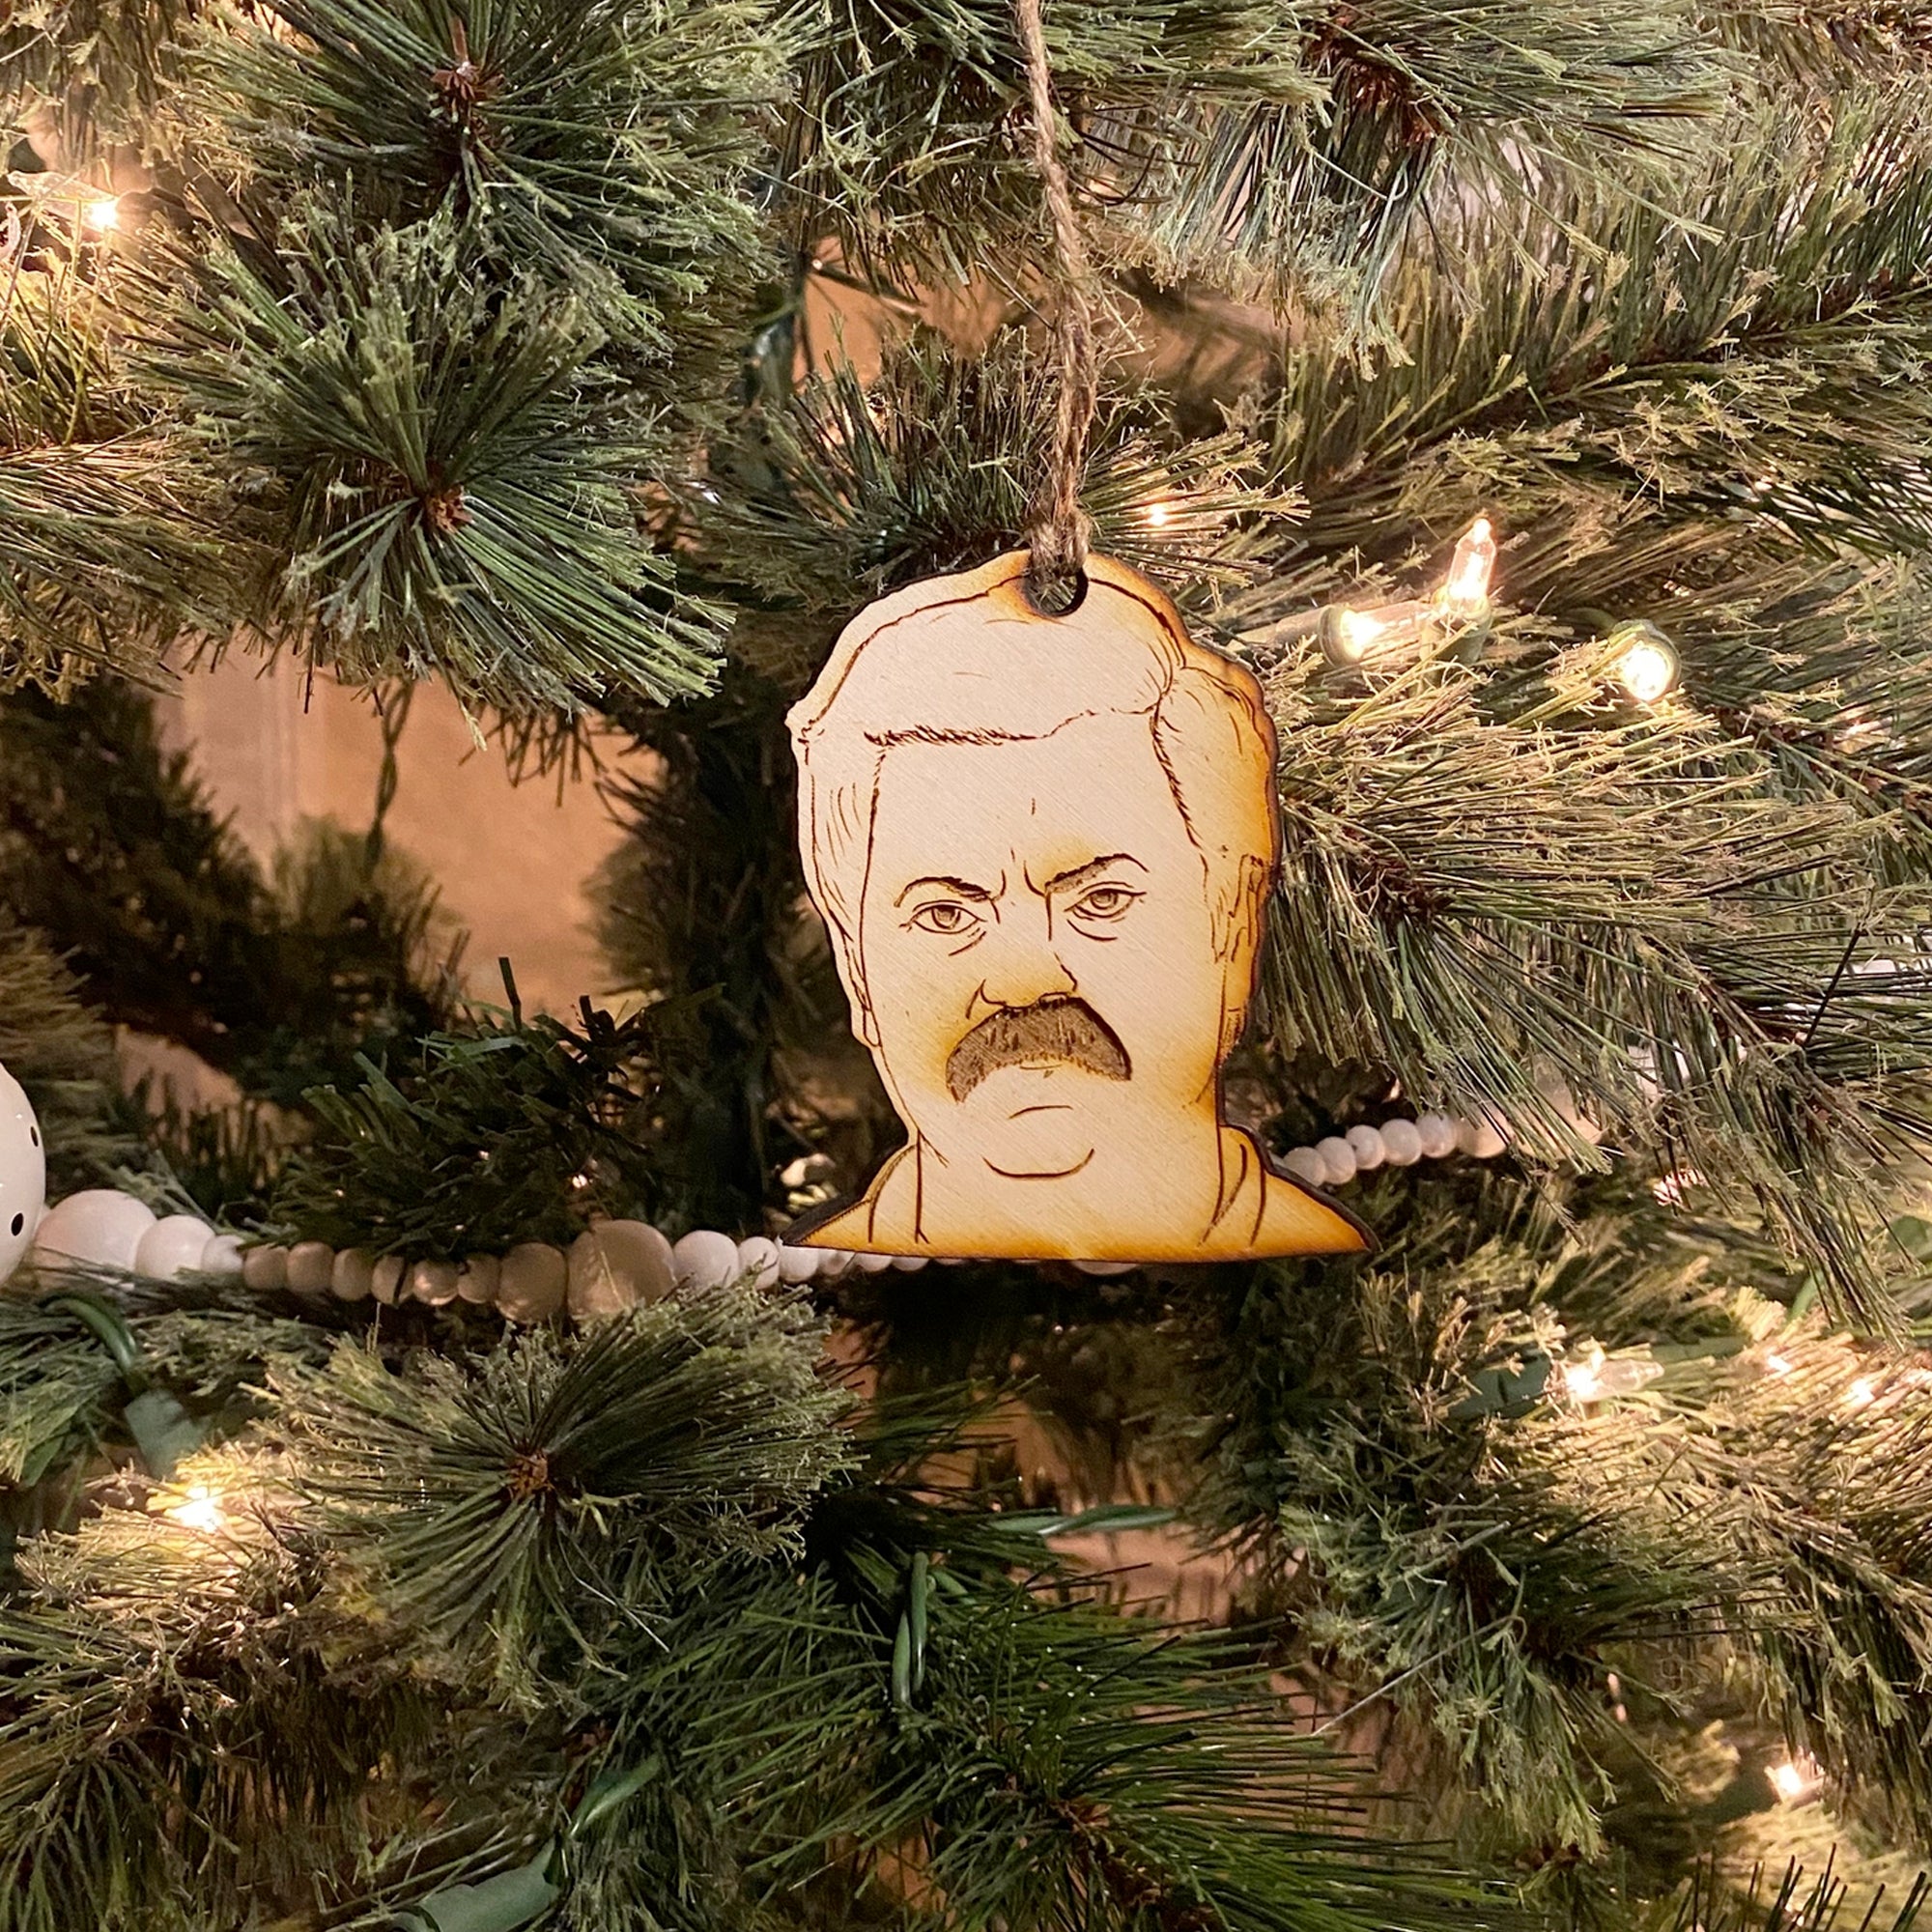 Tree Yoself Ron Swanson (Parks and Rec) Wooden Christmas Ornament